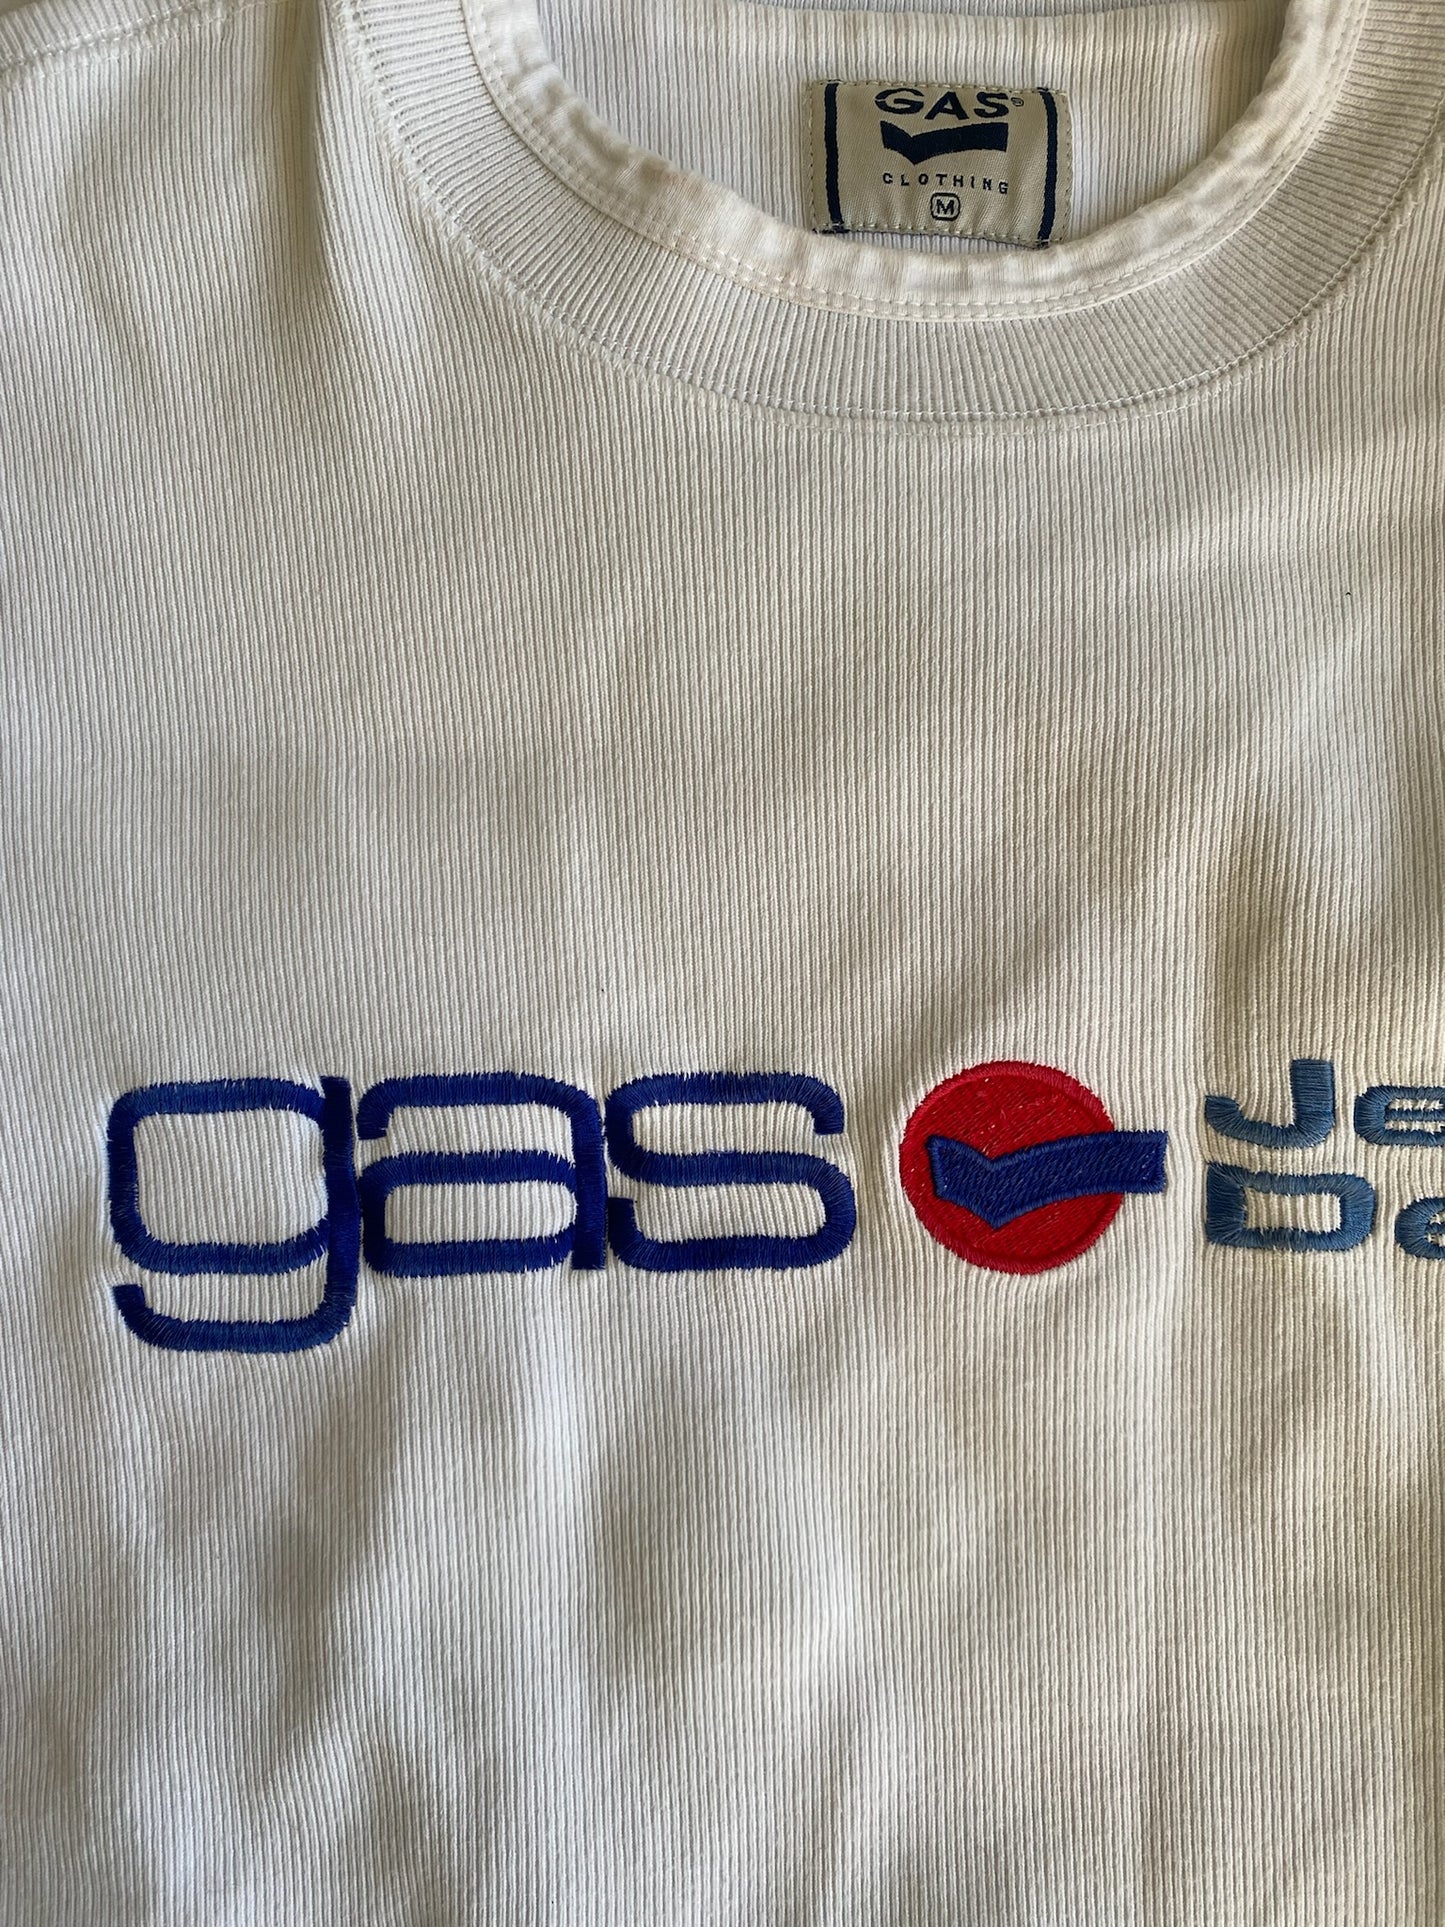 GAS CLOTHING SWEATER